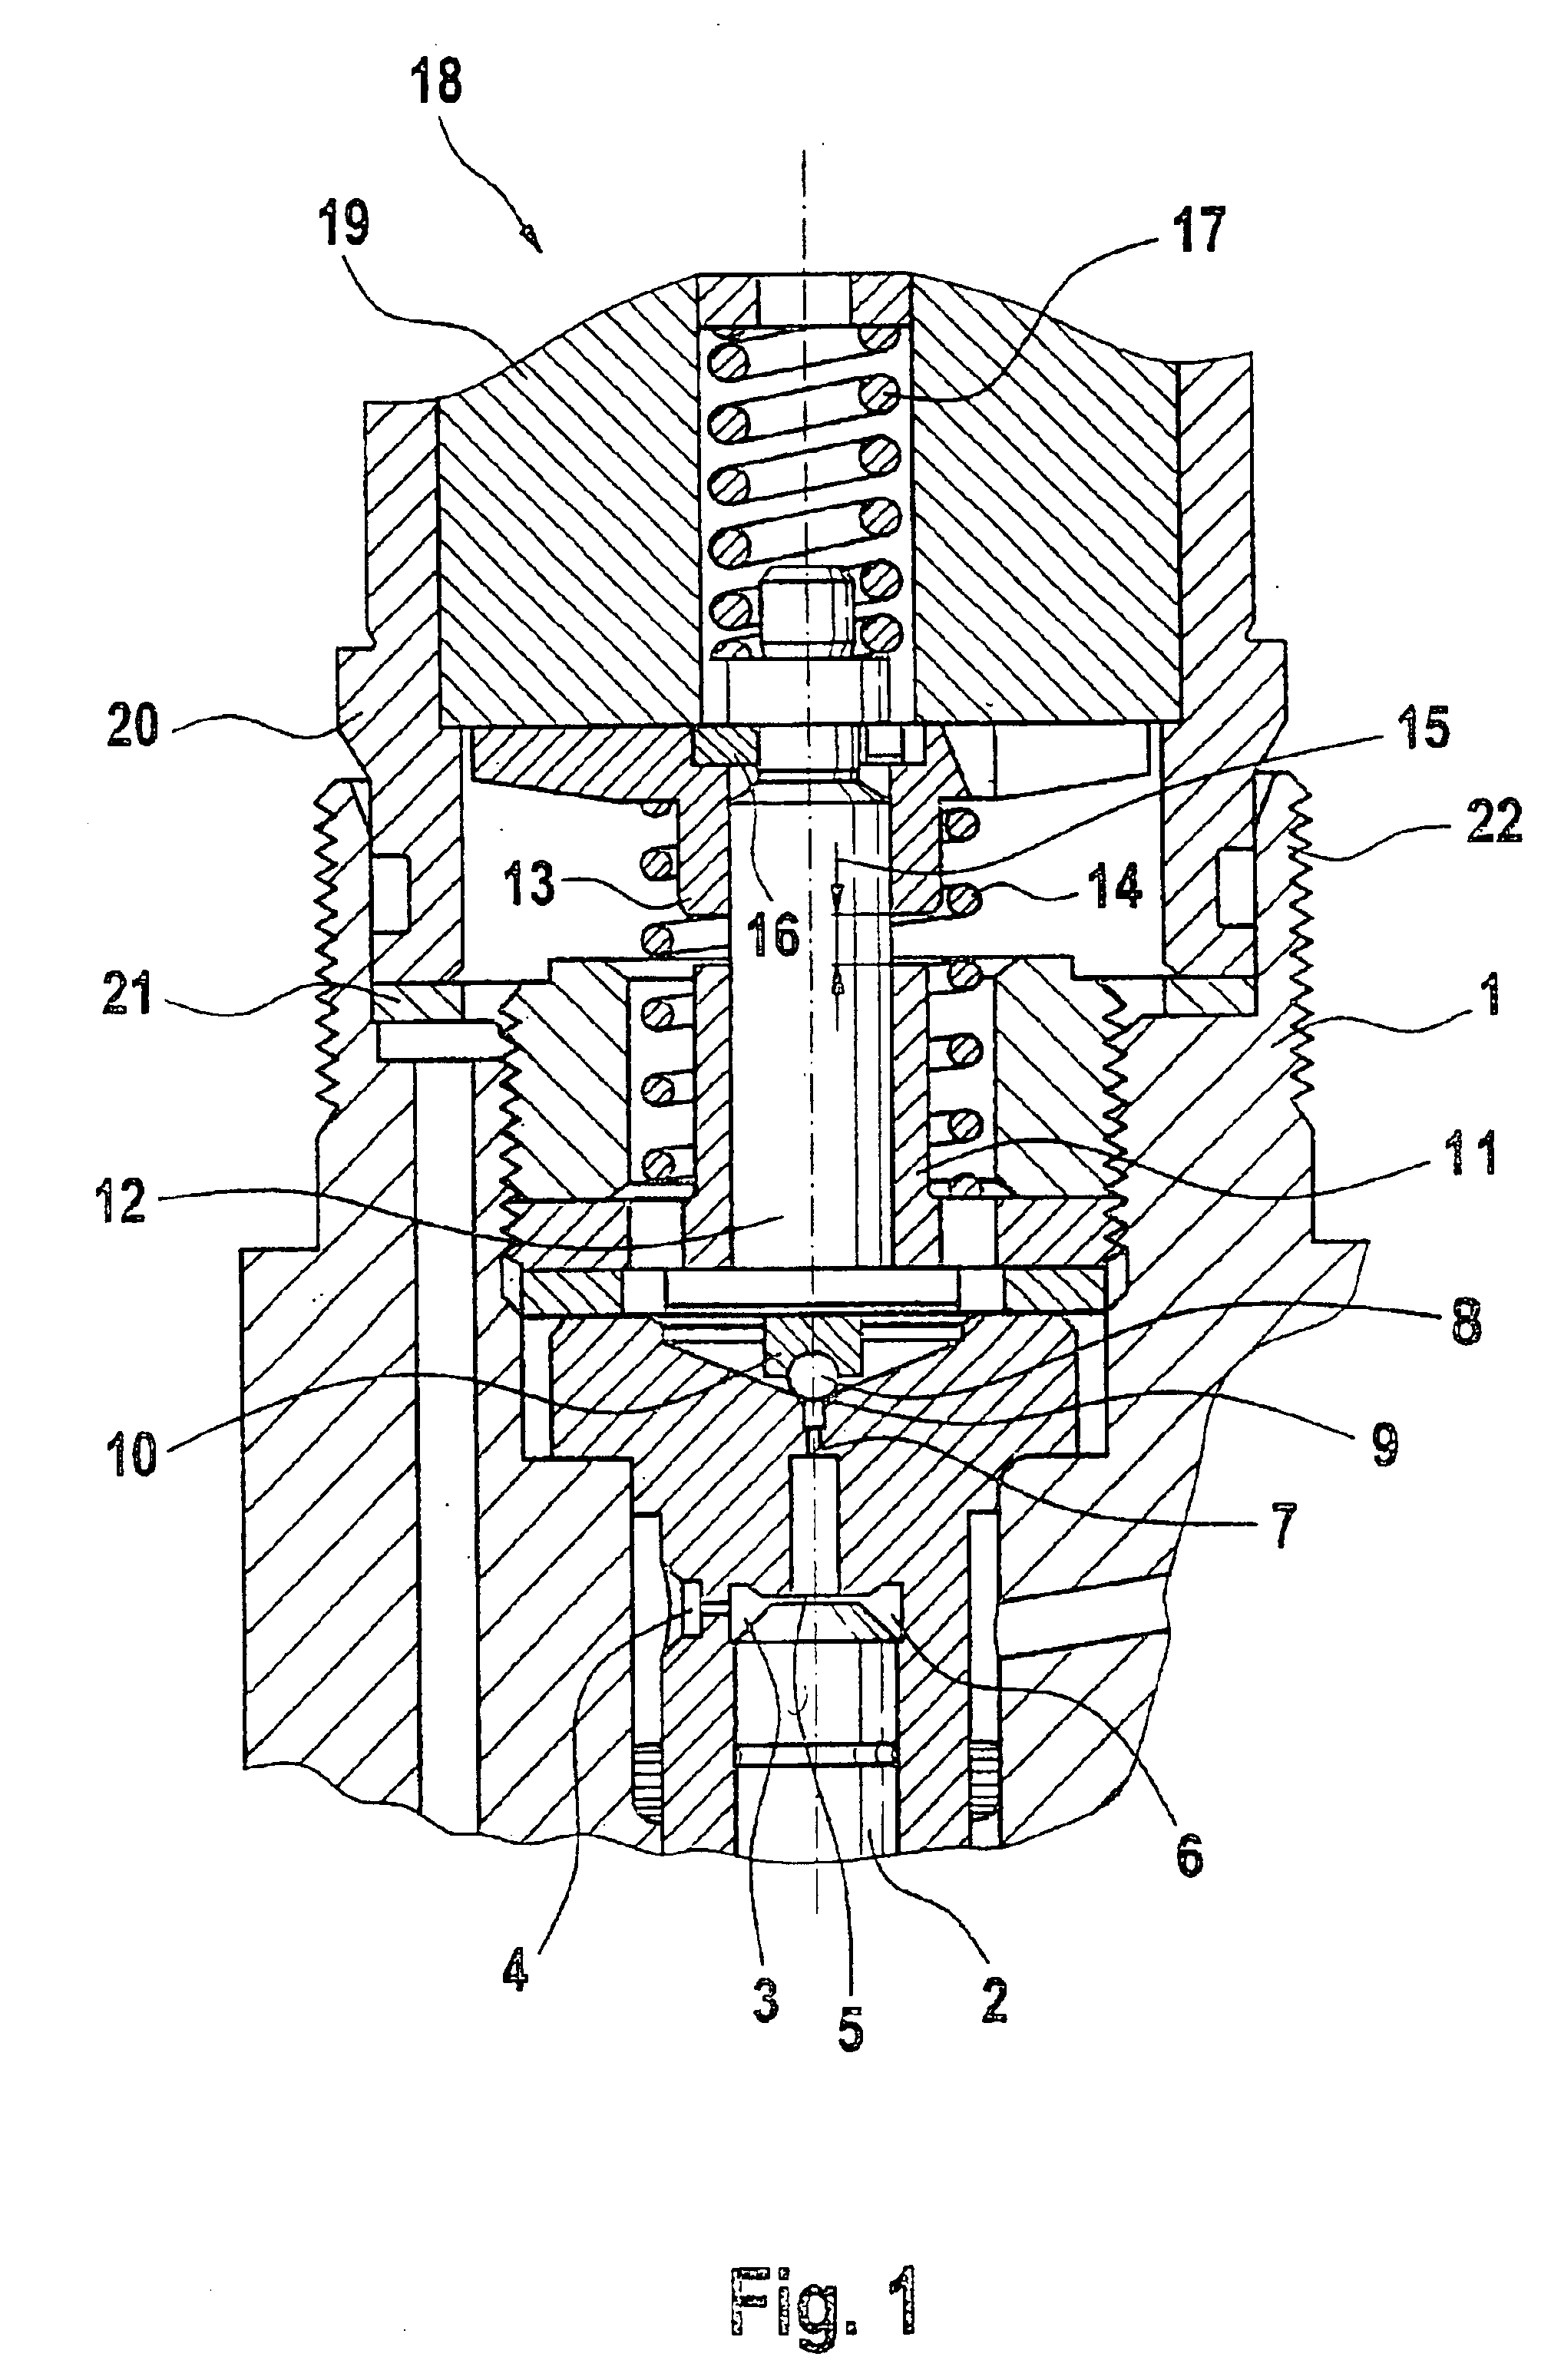 Solenoid valve comprising a plug-in/rotative connection